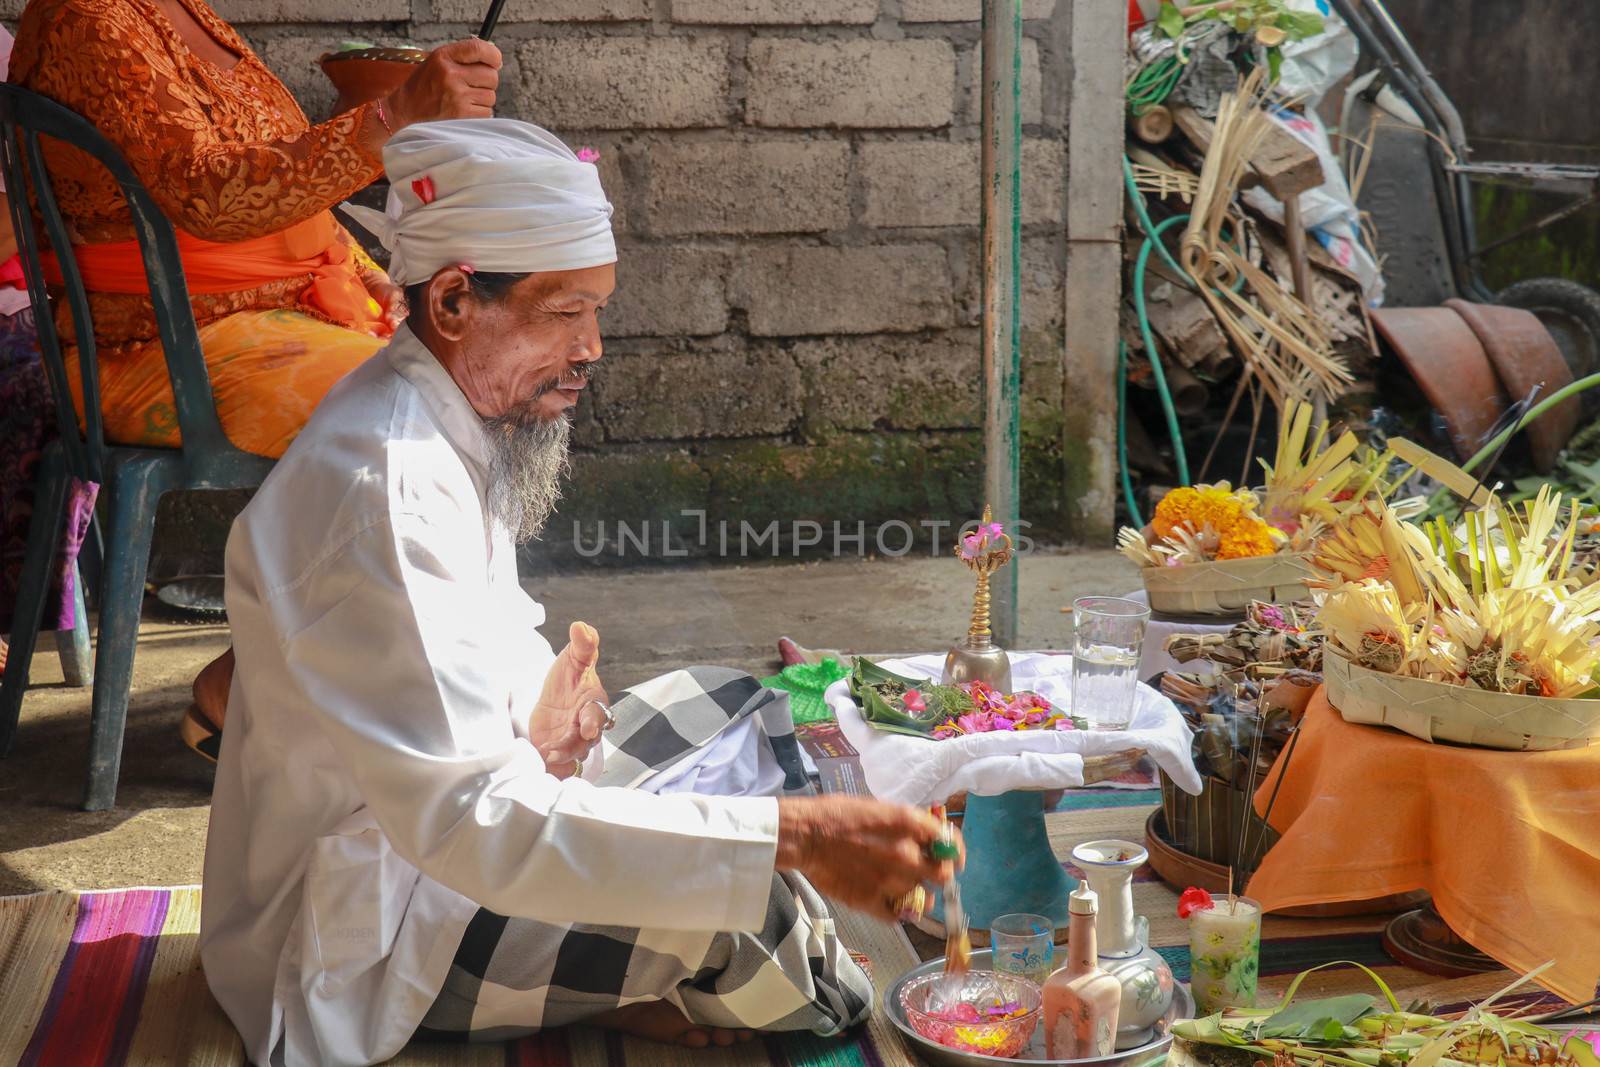 The Hindu Priest or widely known as Pedanda by the Balinese, blessing the ceremony of villas in Nuda dua,Bali by Sanatana2008